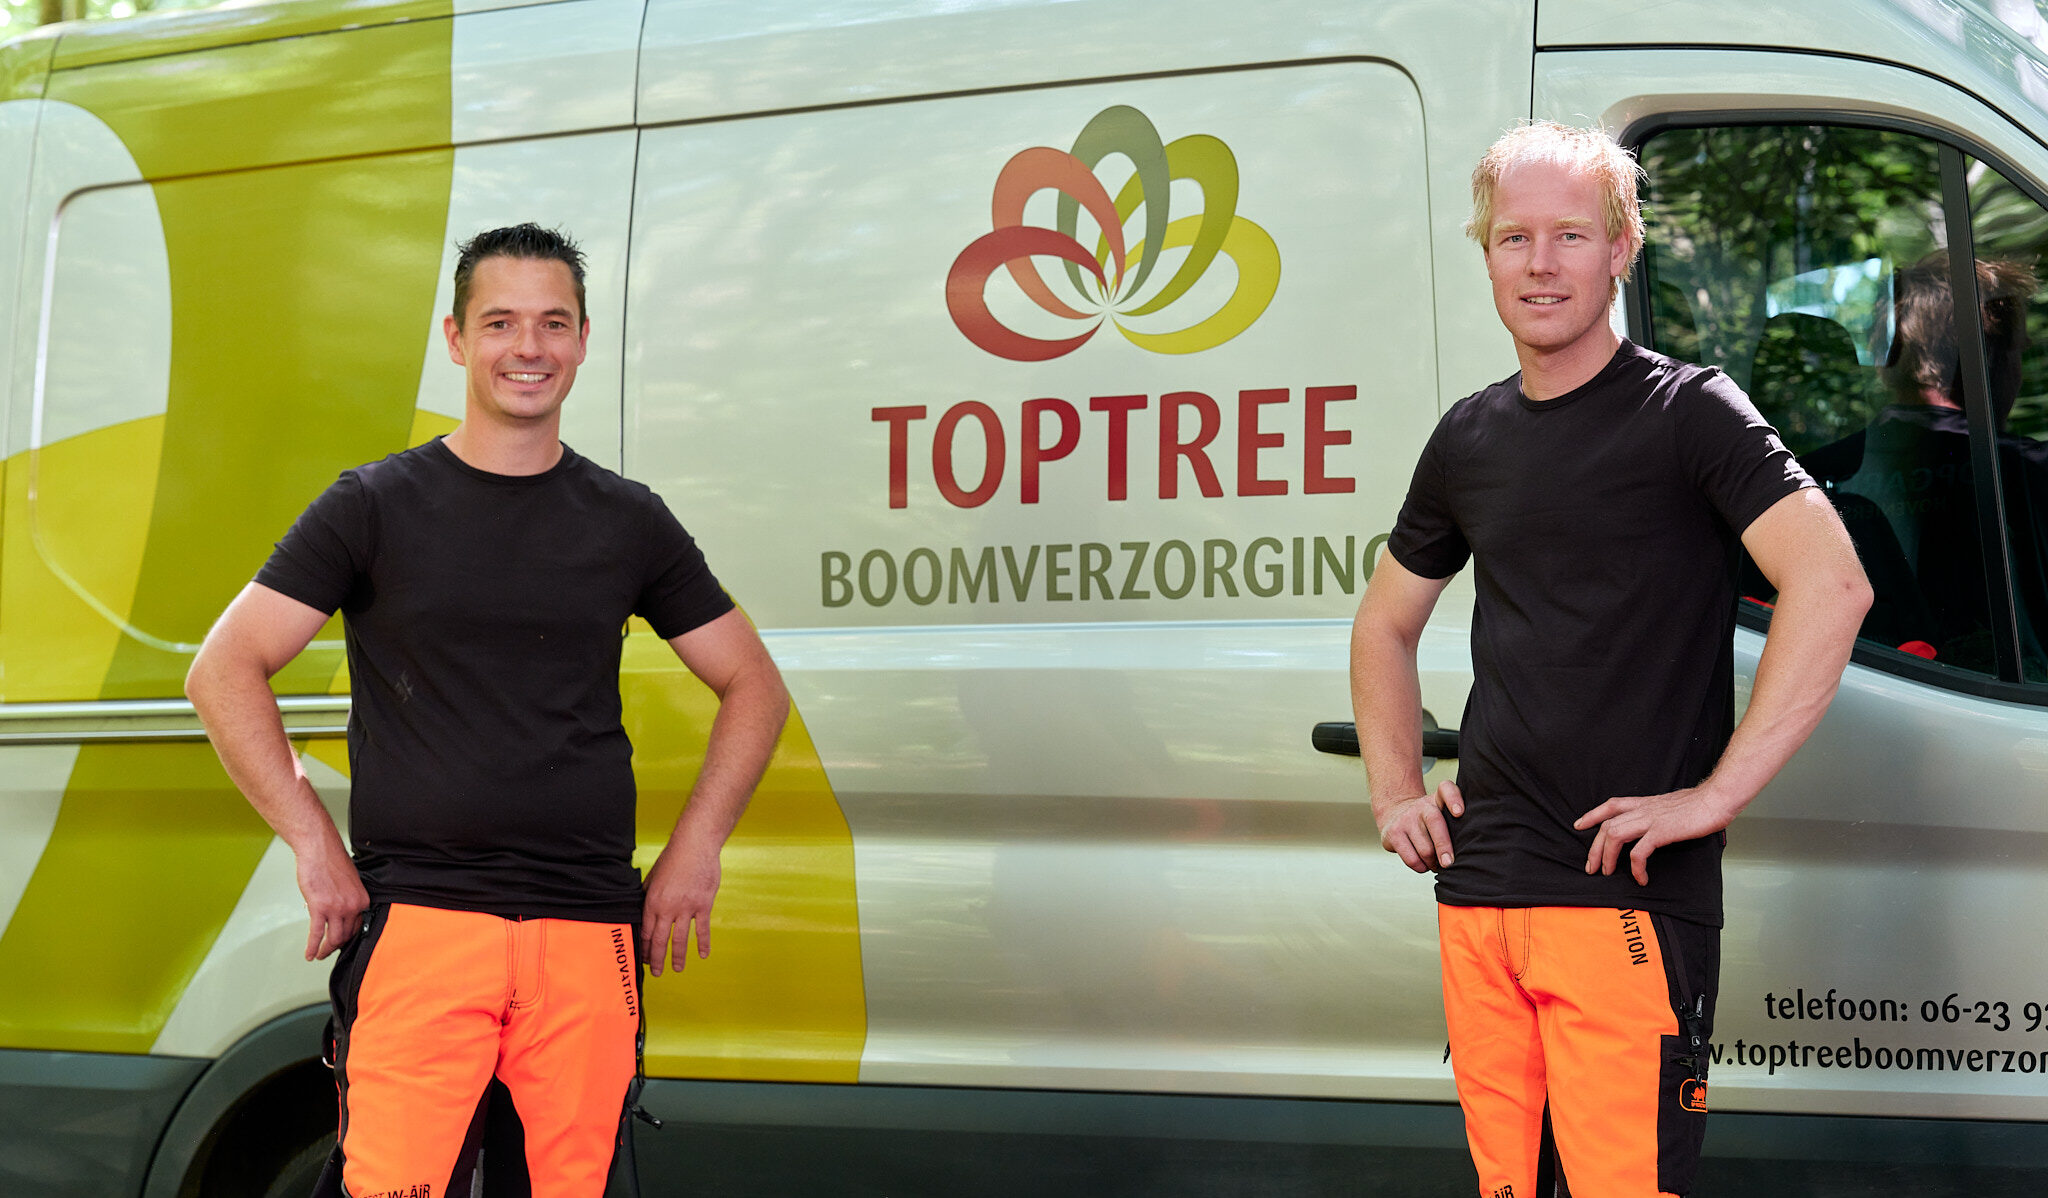 Toptree over ons